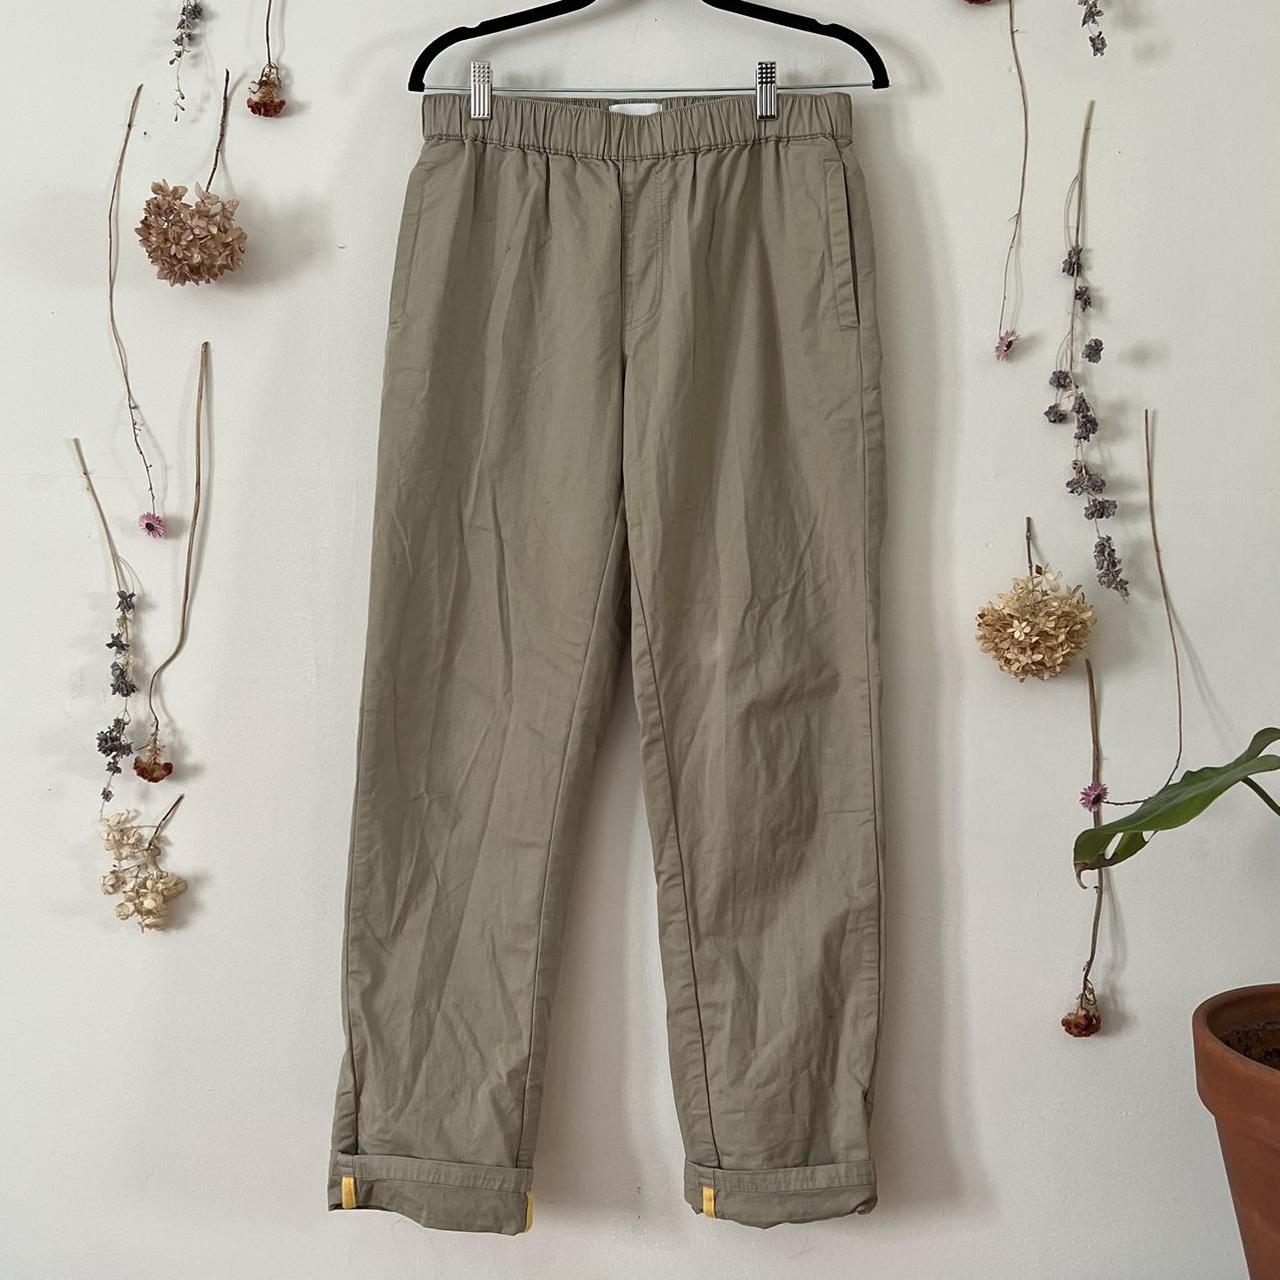 Pact Woven Twill Roll Up Pant Size M Durable organic... - Depop